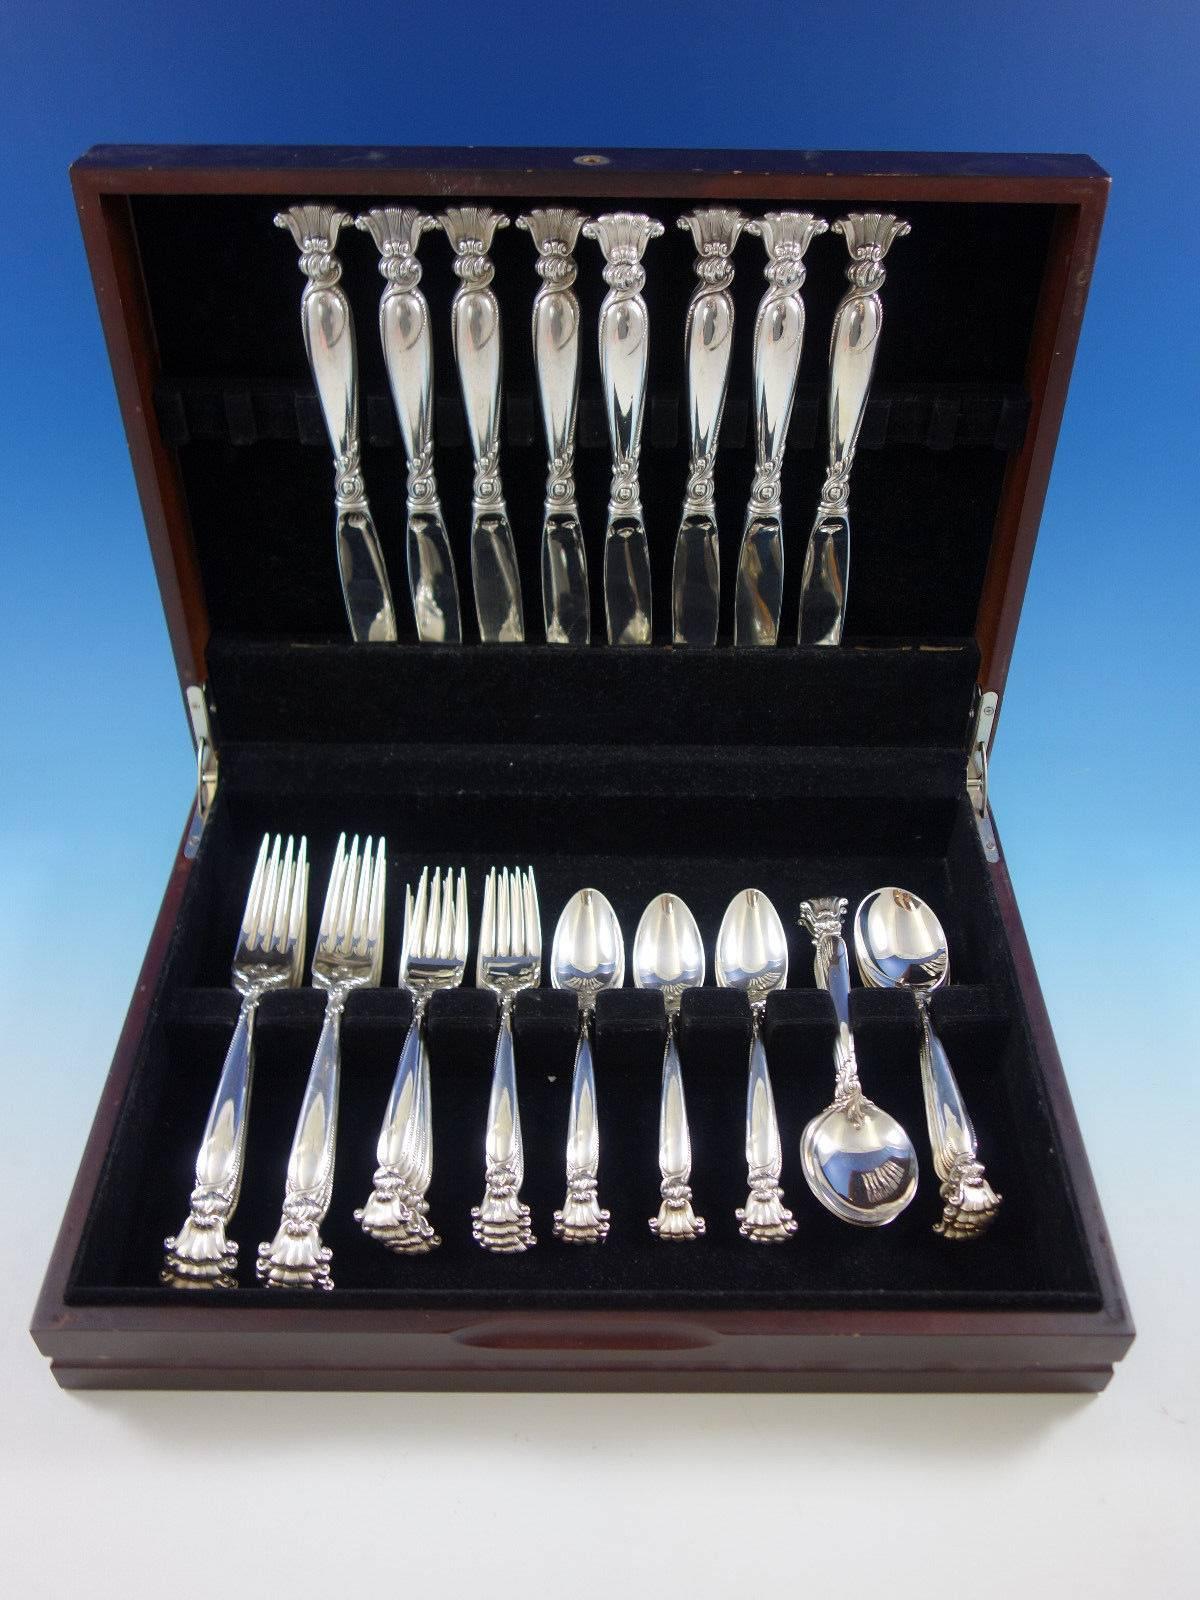 Dinner size romance of the sea by Wallace sterling silver flatware set - 40 pieces. This set includes: 

Eight dinner size knives, 9 7/8